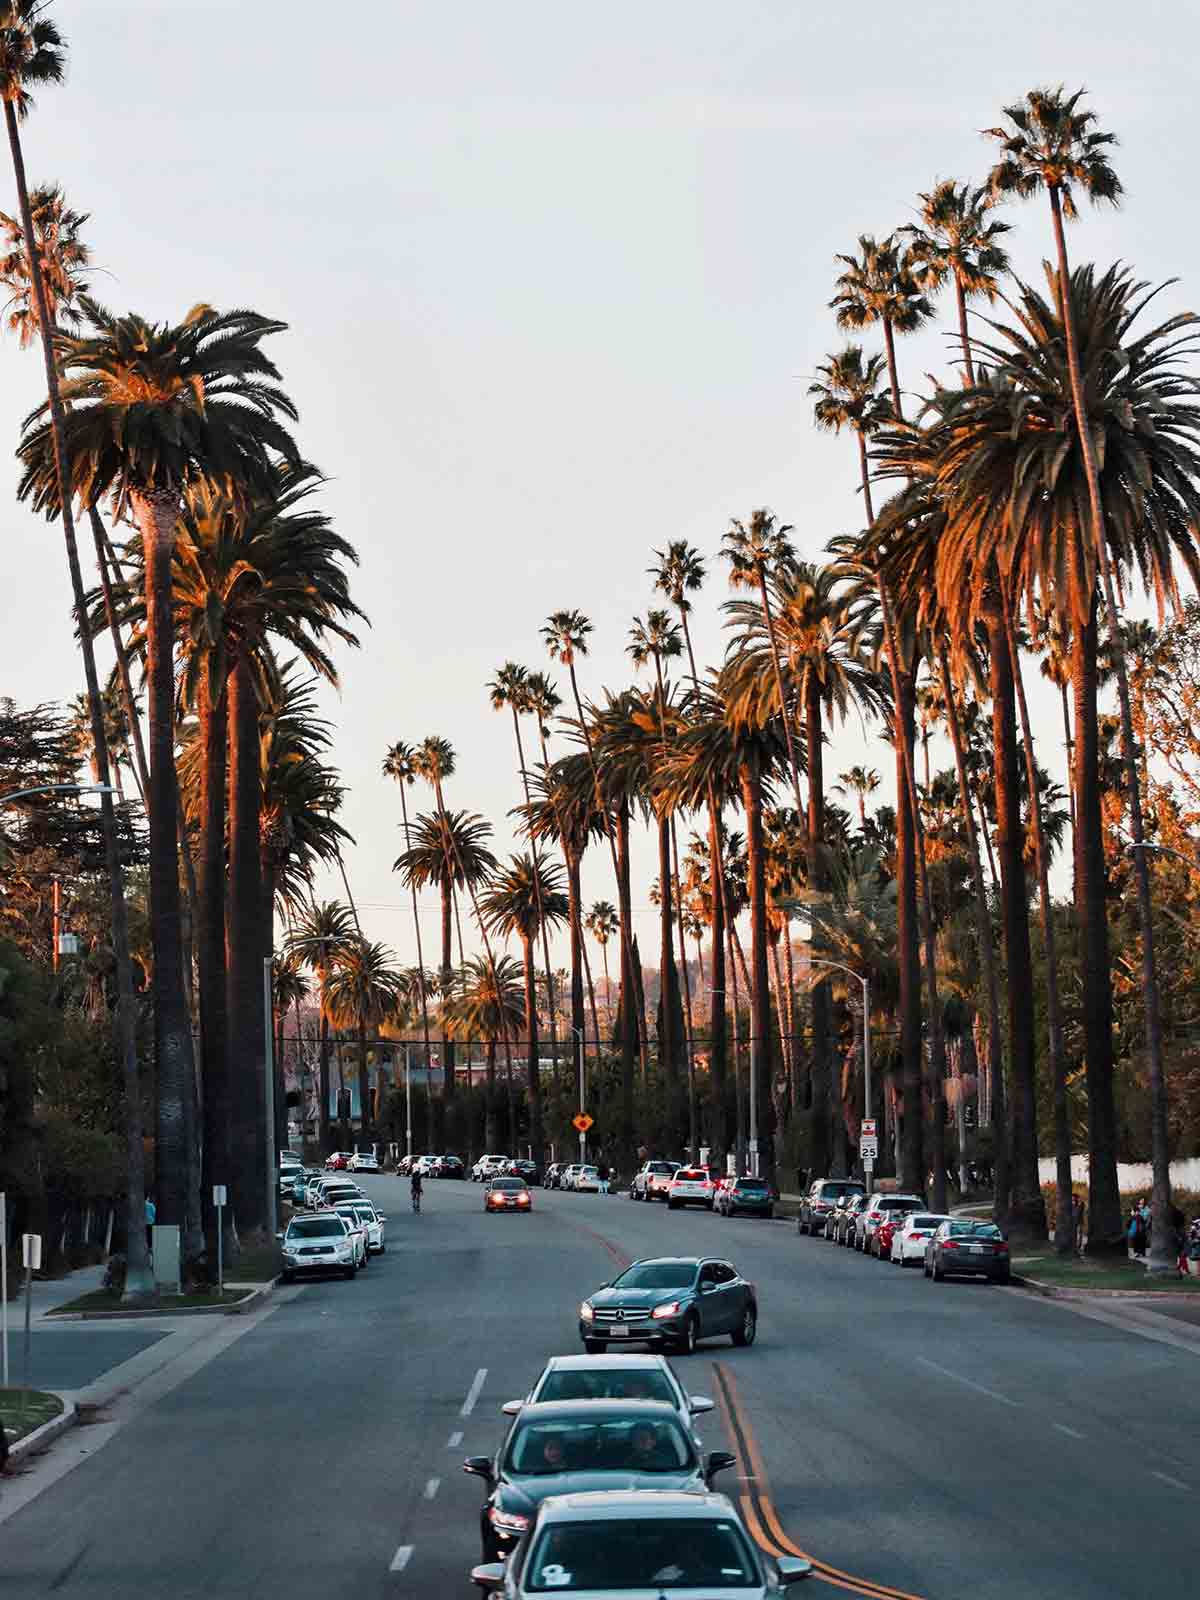 The iconic palm trees in a neighborhood in Beverly Hills, Los Angeles